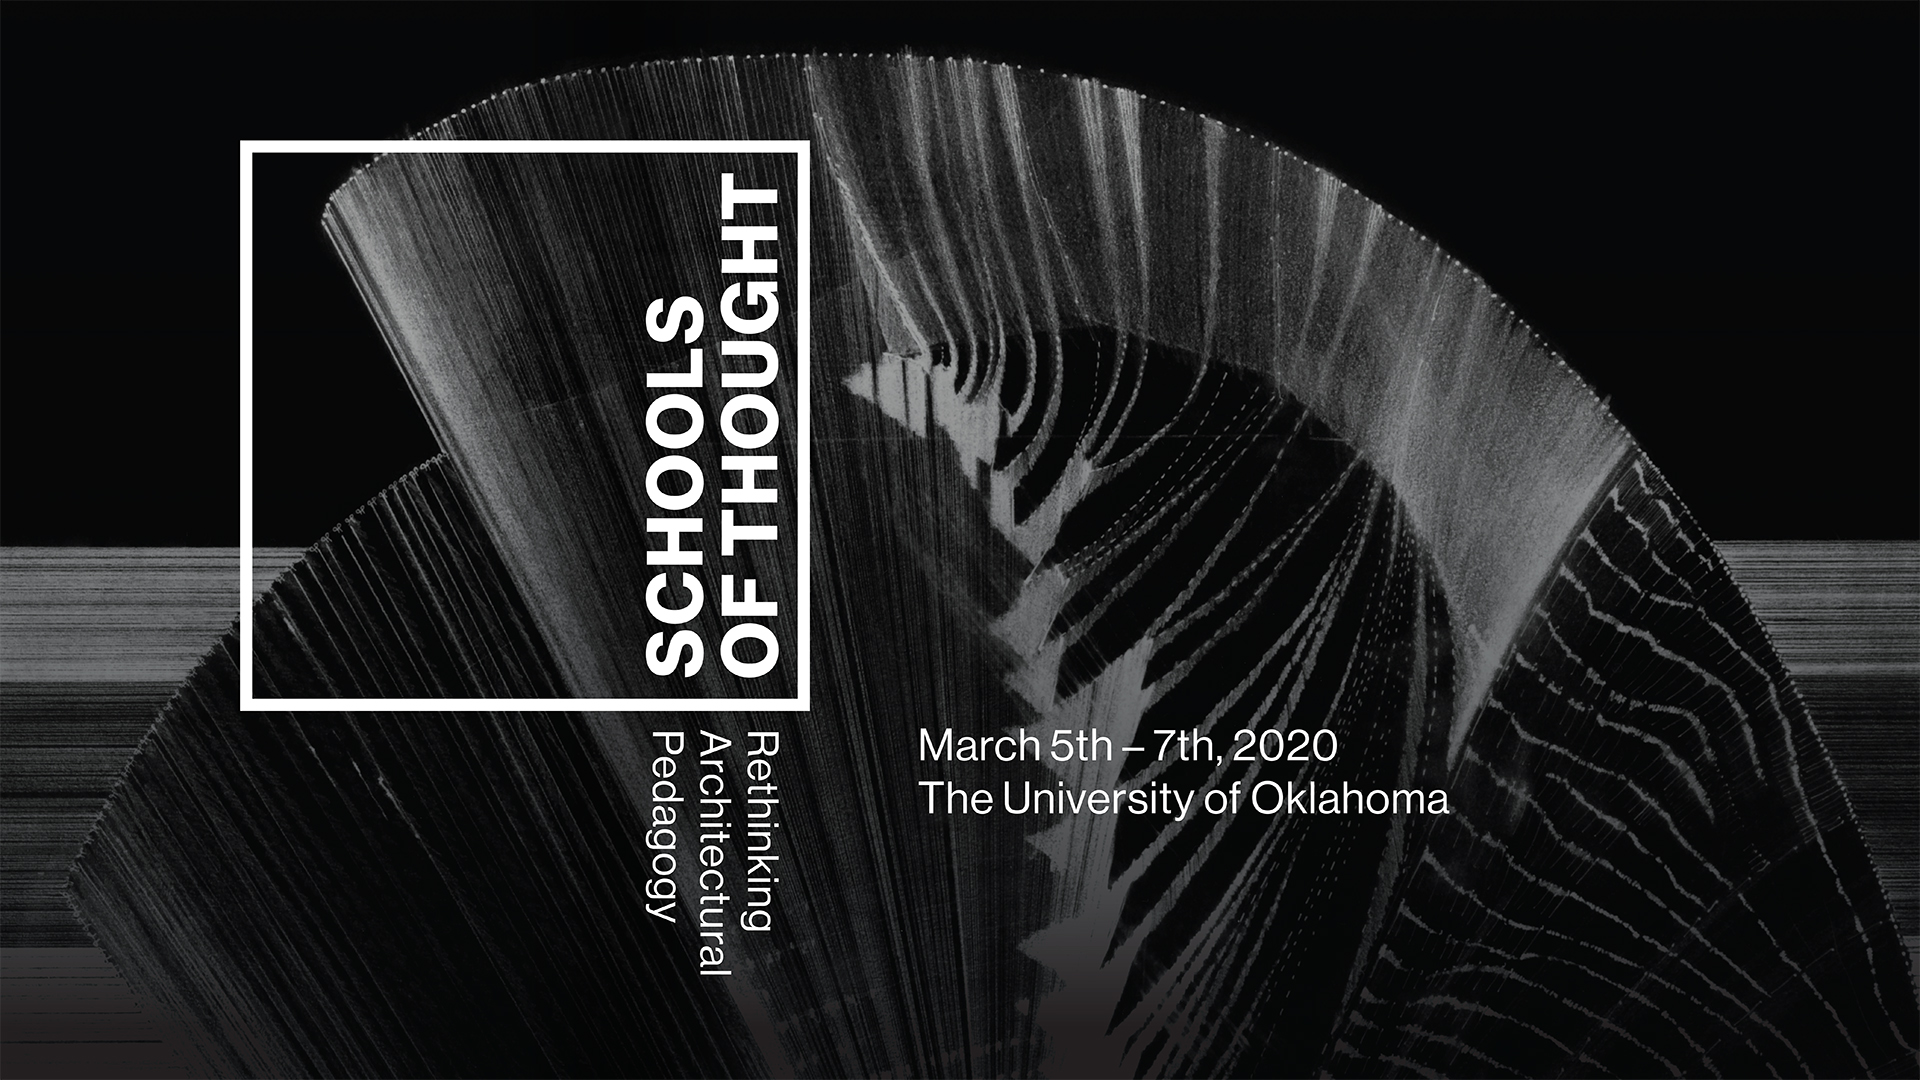 GCA Hosting “Schools of Thought” Conference on Design Pedagogy